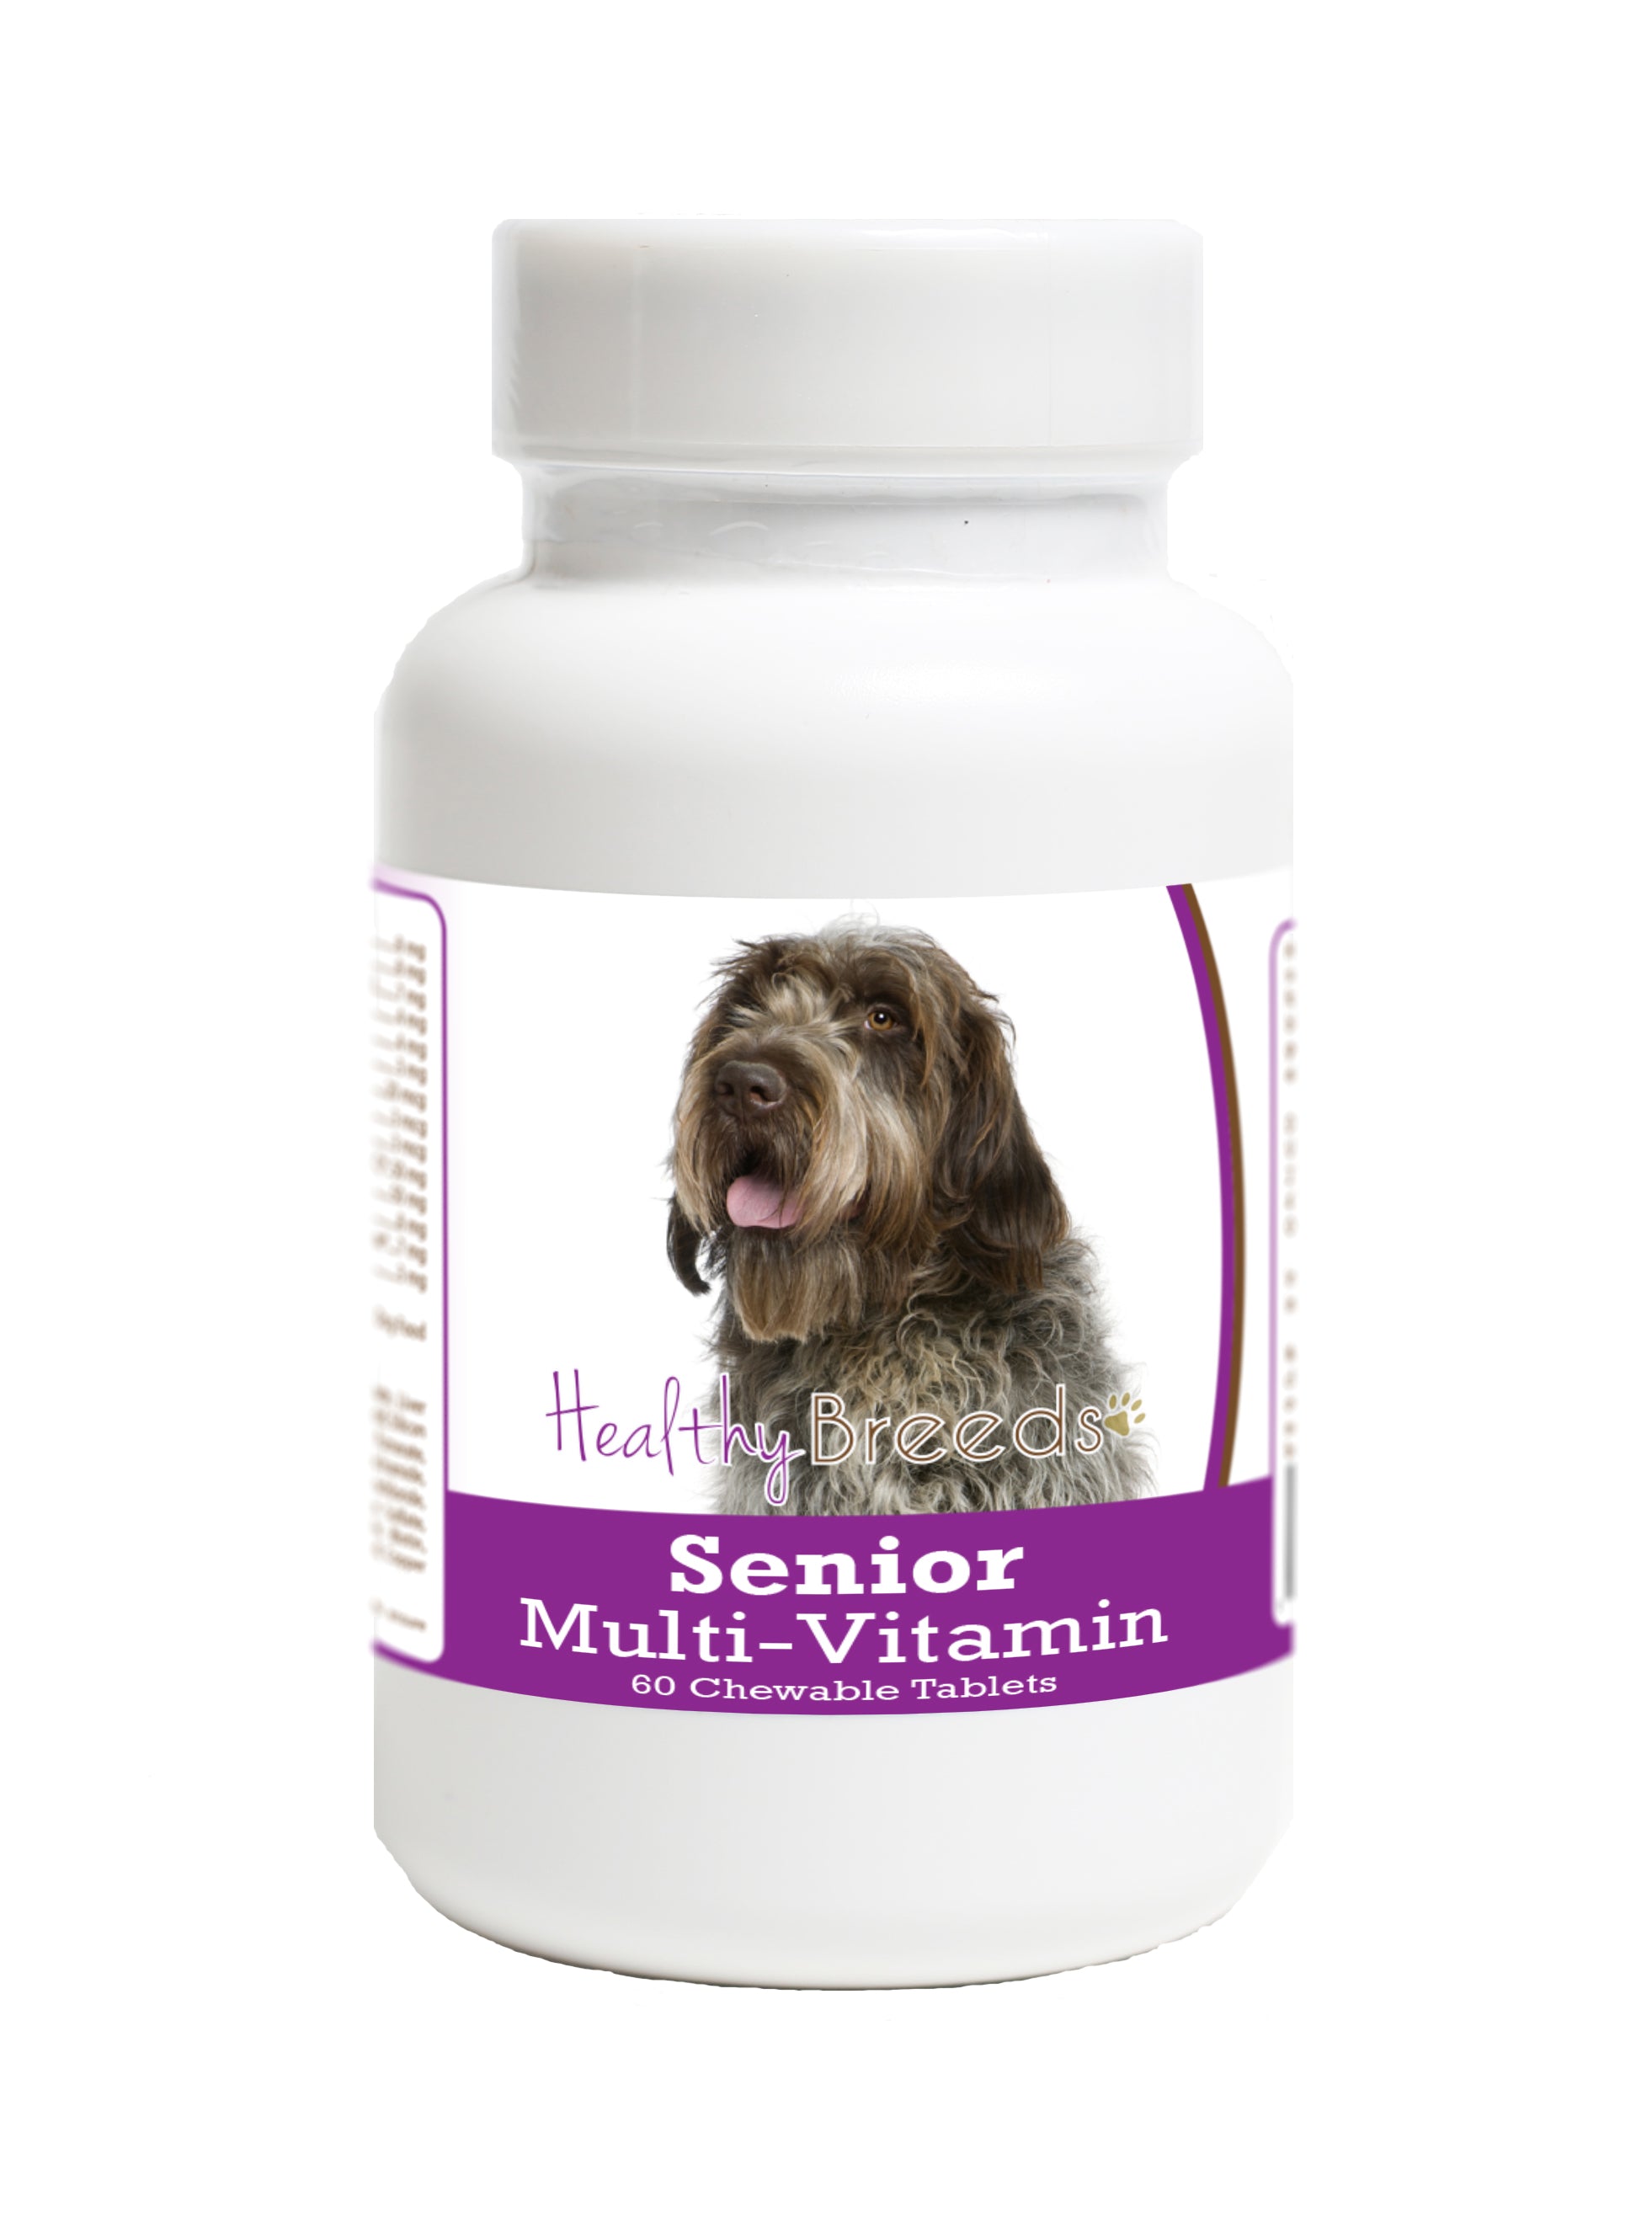 Wirehaired Pointing Griffon Senior Dog Multivitamin Tablets 60 Count